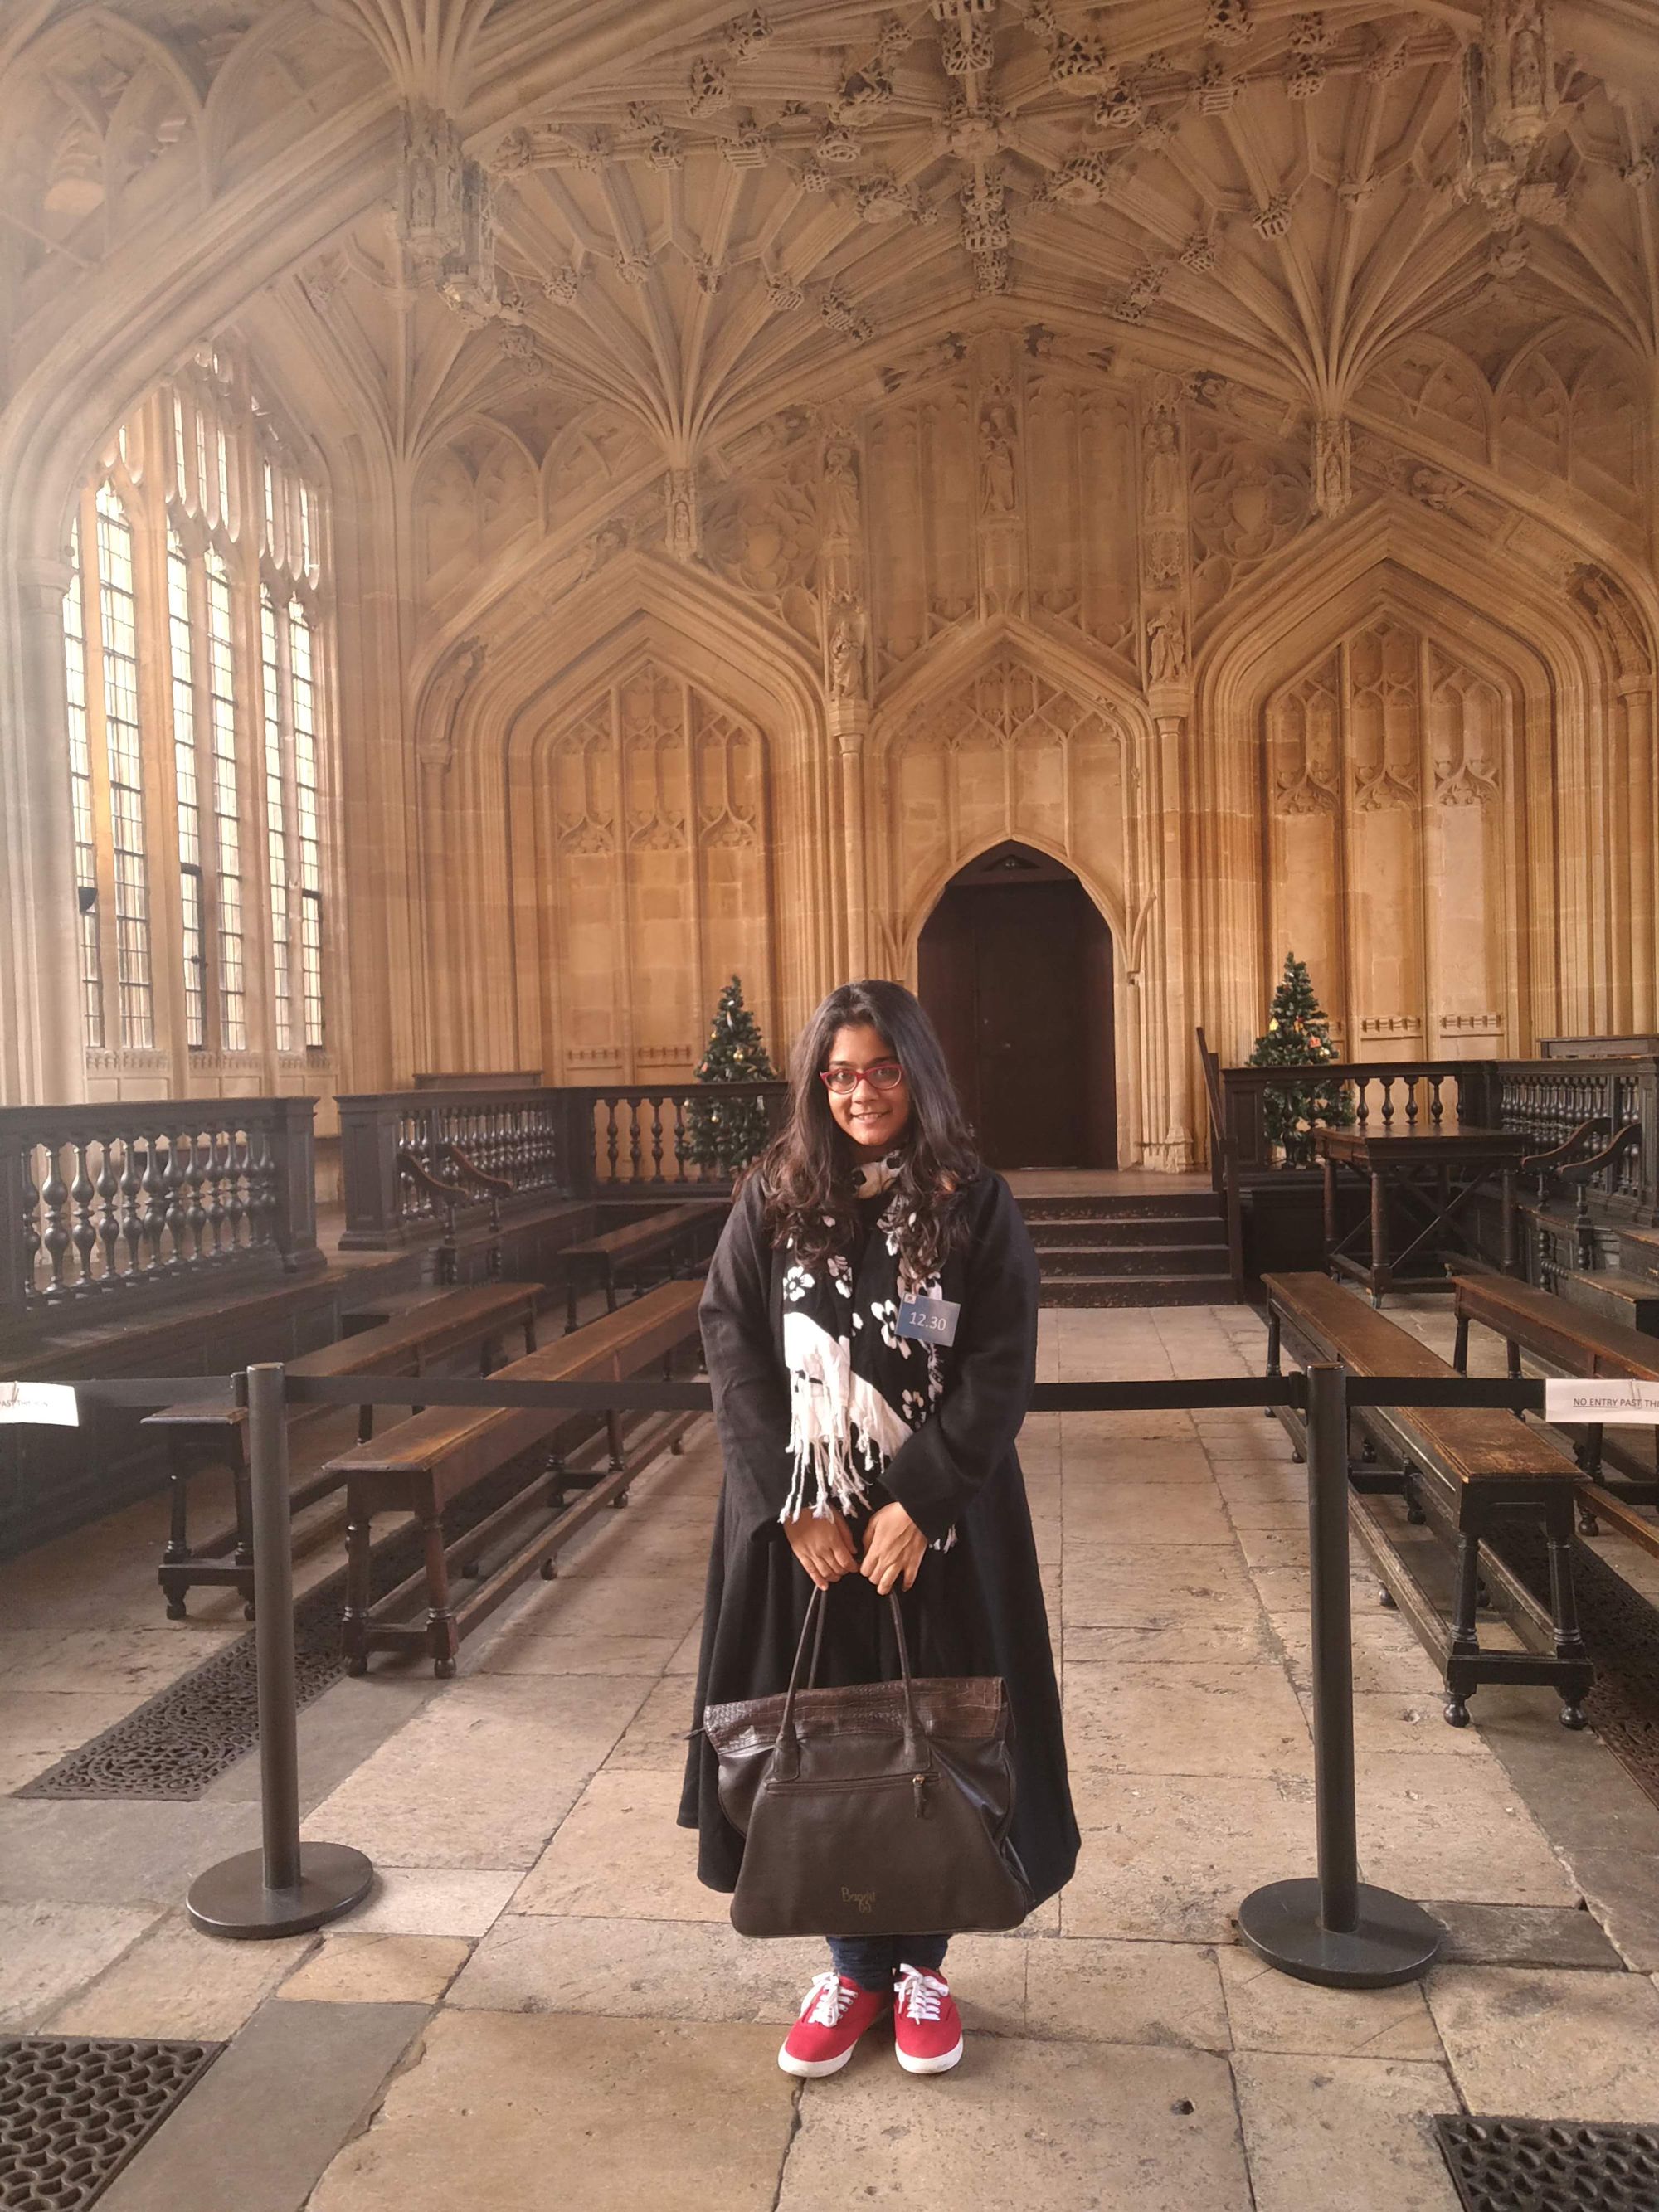 Fetus Divya at the Bodleian Library